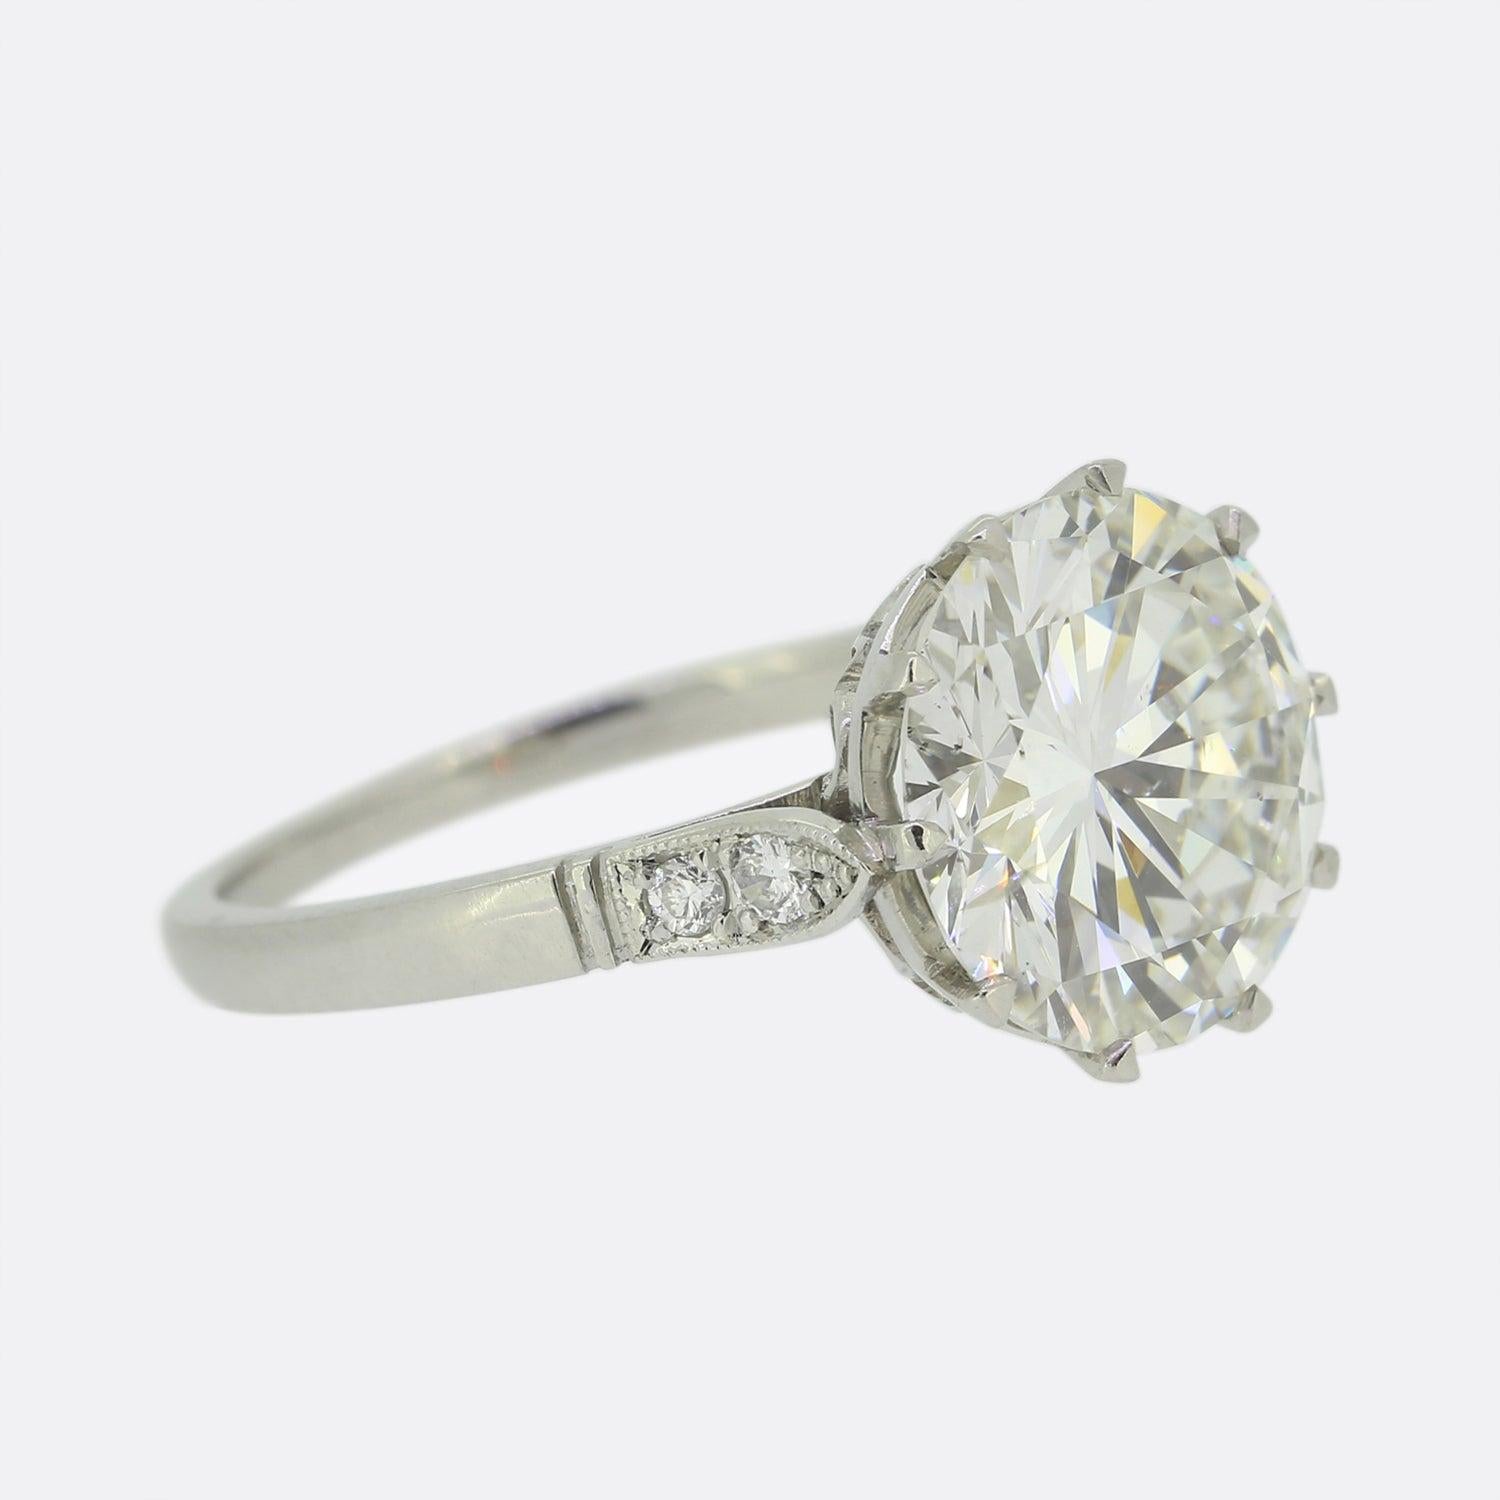 Round Cut 4.02 Carat Transitional Cut Diamond Solitaire Engagement Ring For Sale